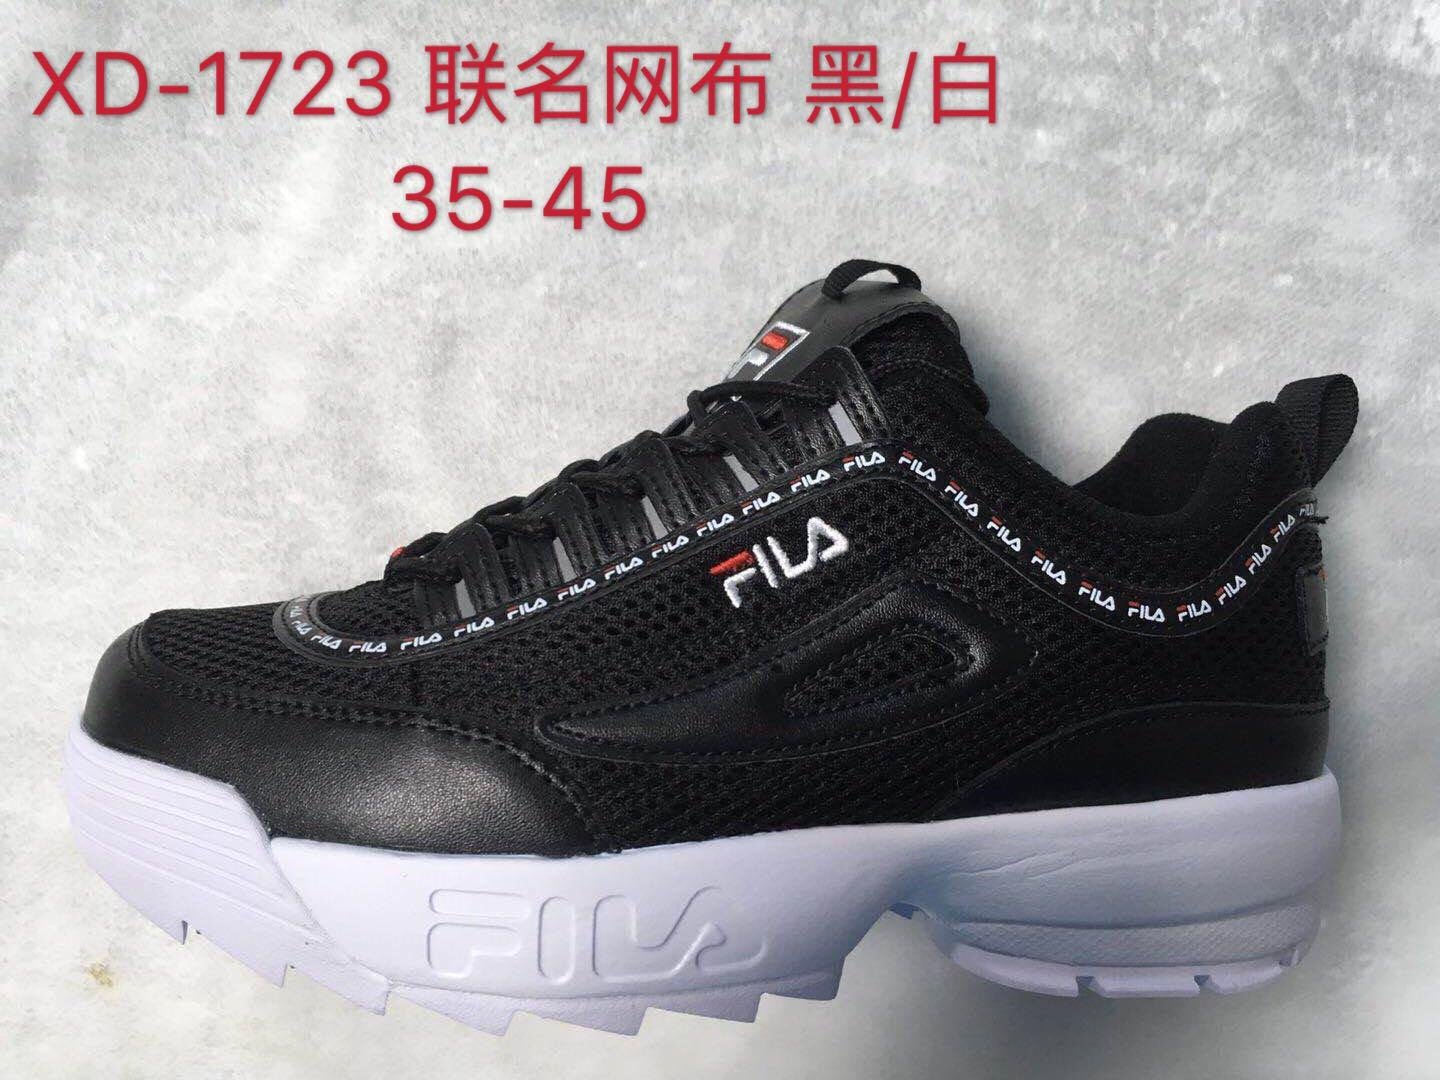 2019 New style Fila shoes Fila Disruptor 2 II Women Premium Running  Sneakers - 35-45 (China Trading Company) - Athletic & Sports Shoes -